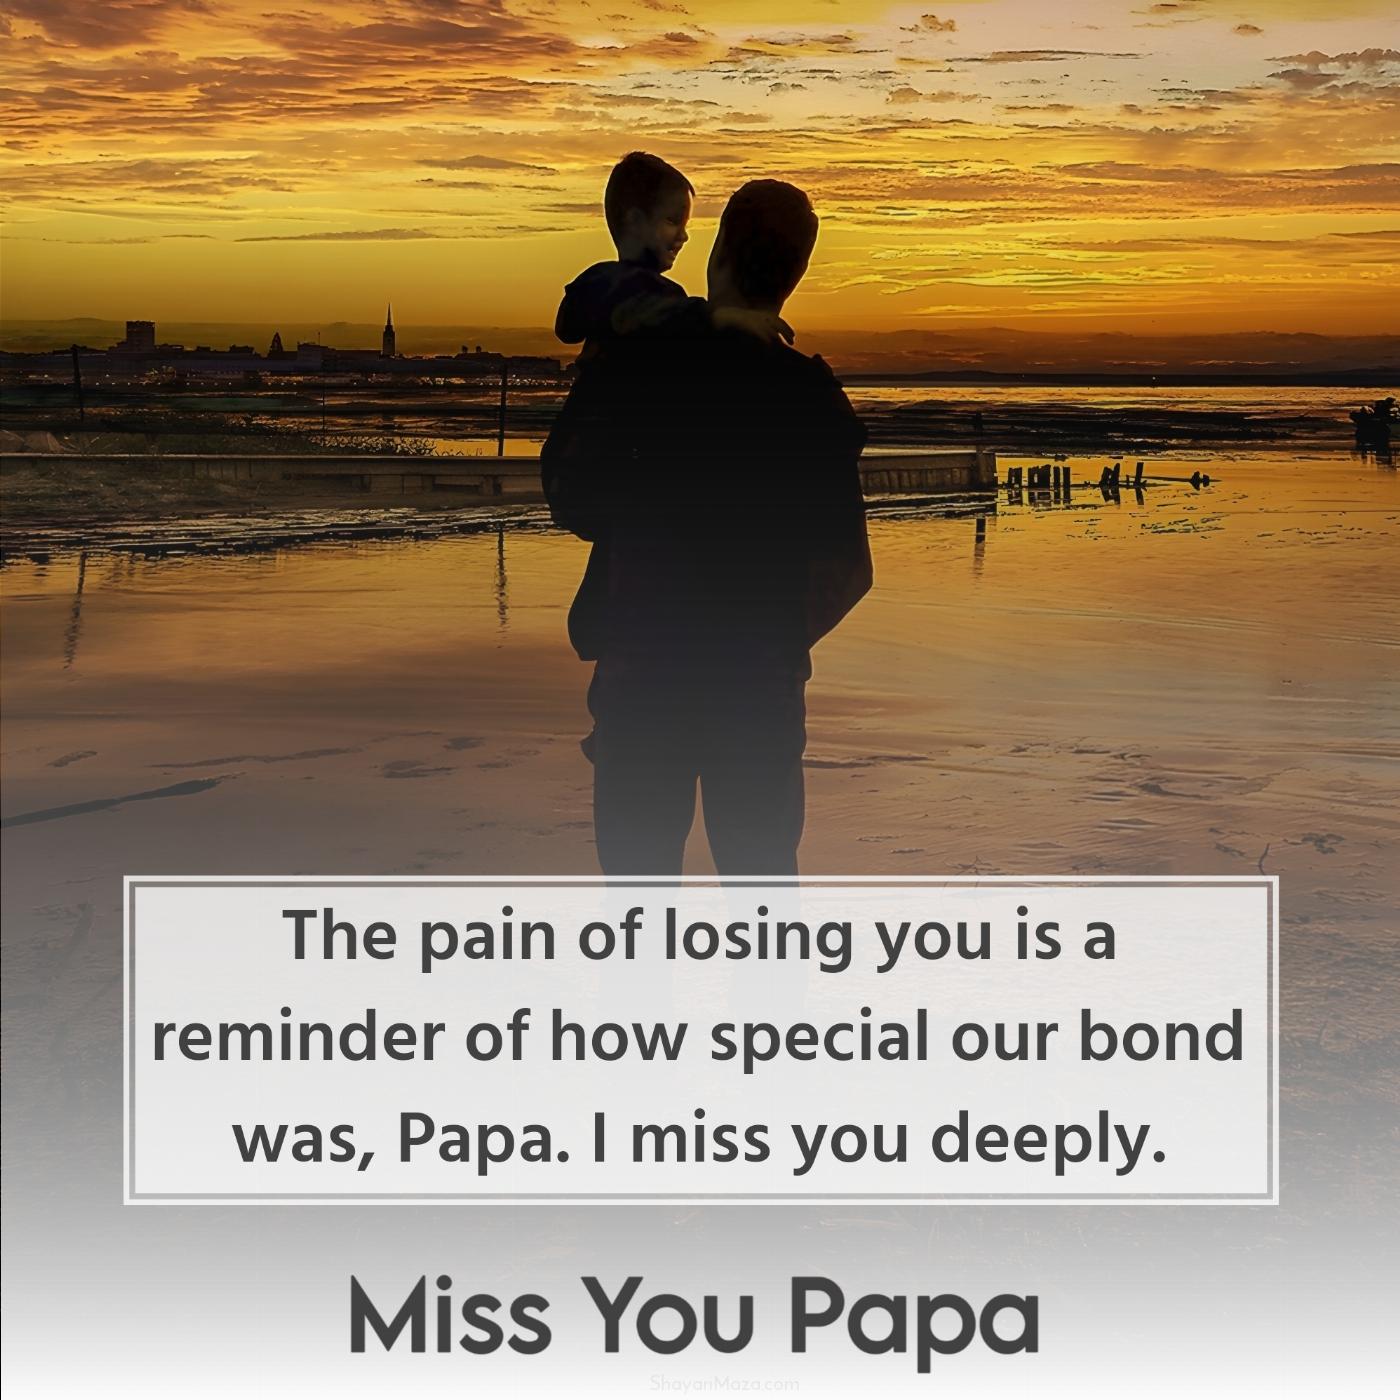 The pain of losing you is a reminder of how special our bond was Papa